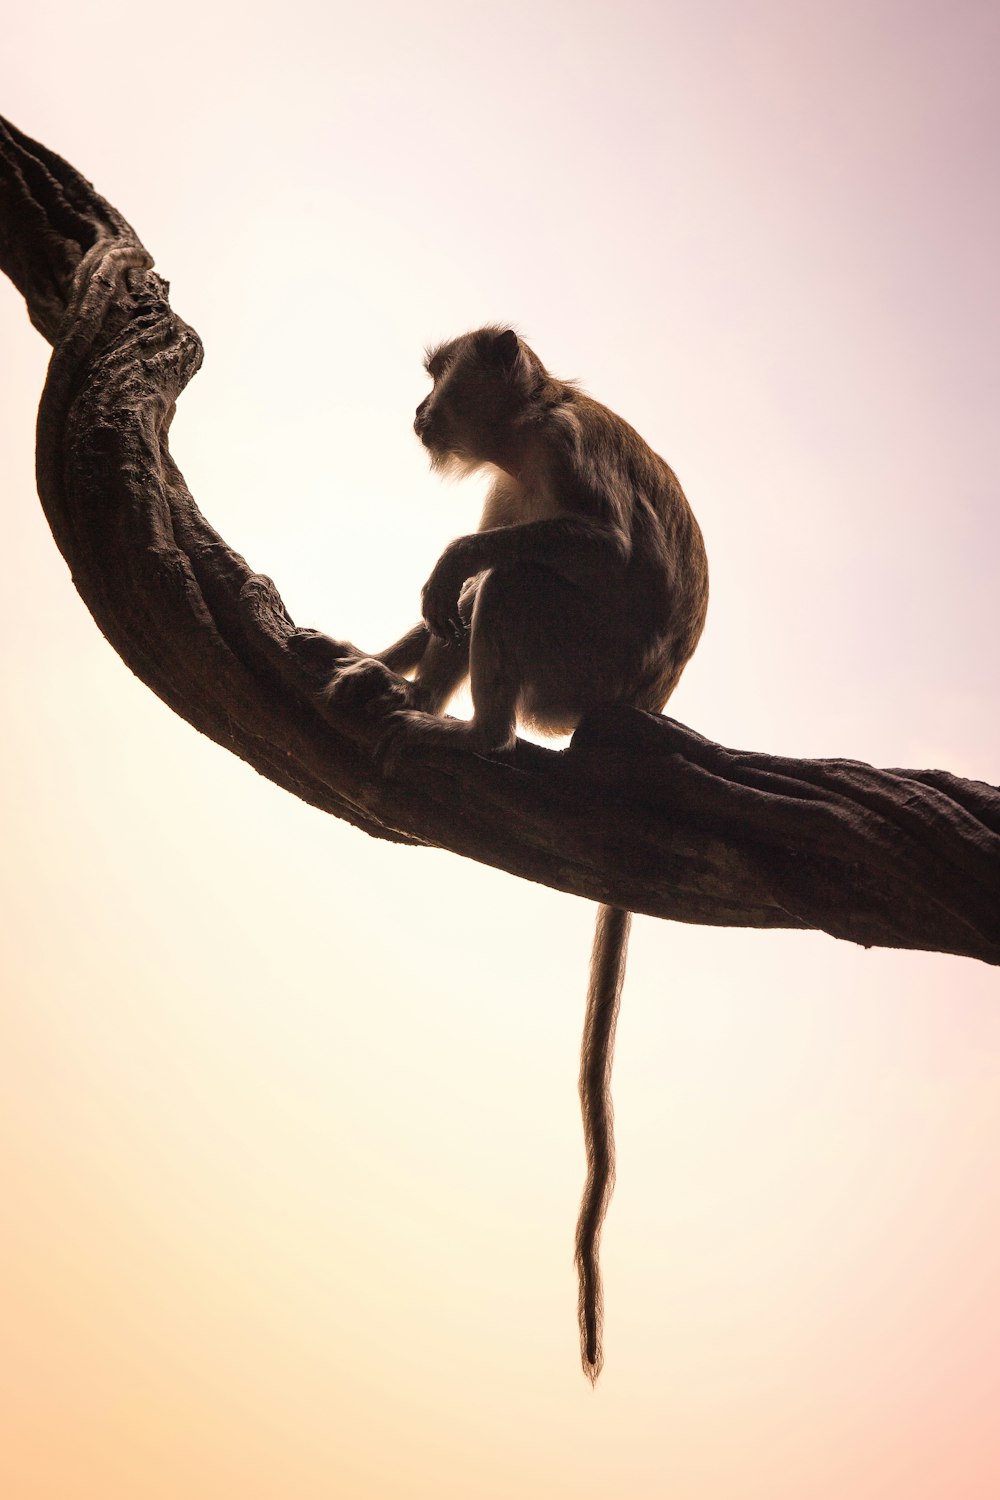 Best 500+ Monkey Pictures [HD] | Download Free Images & Stock Photos on  Unsplash